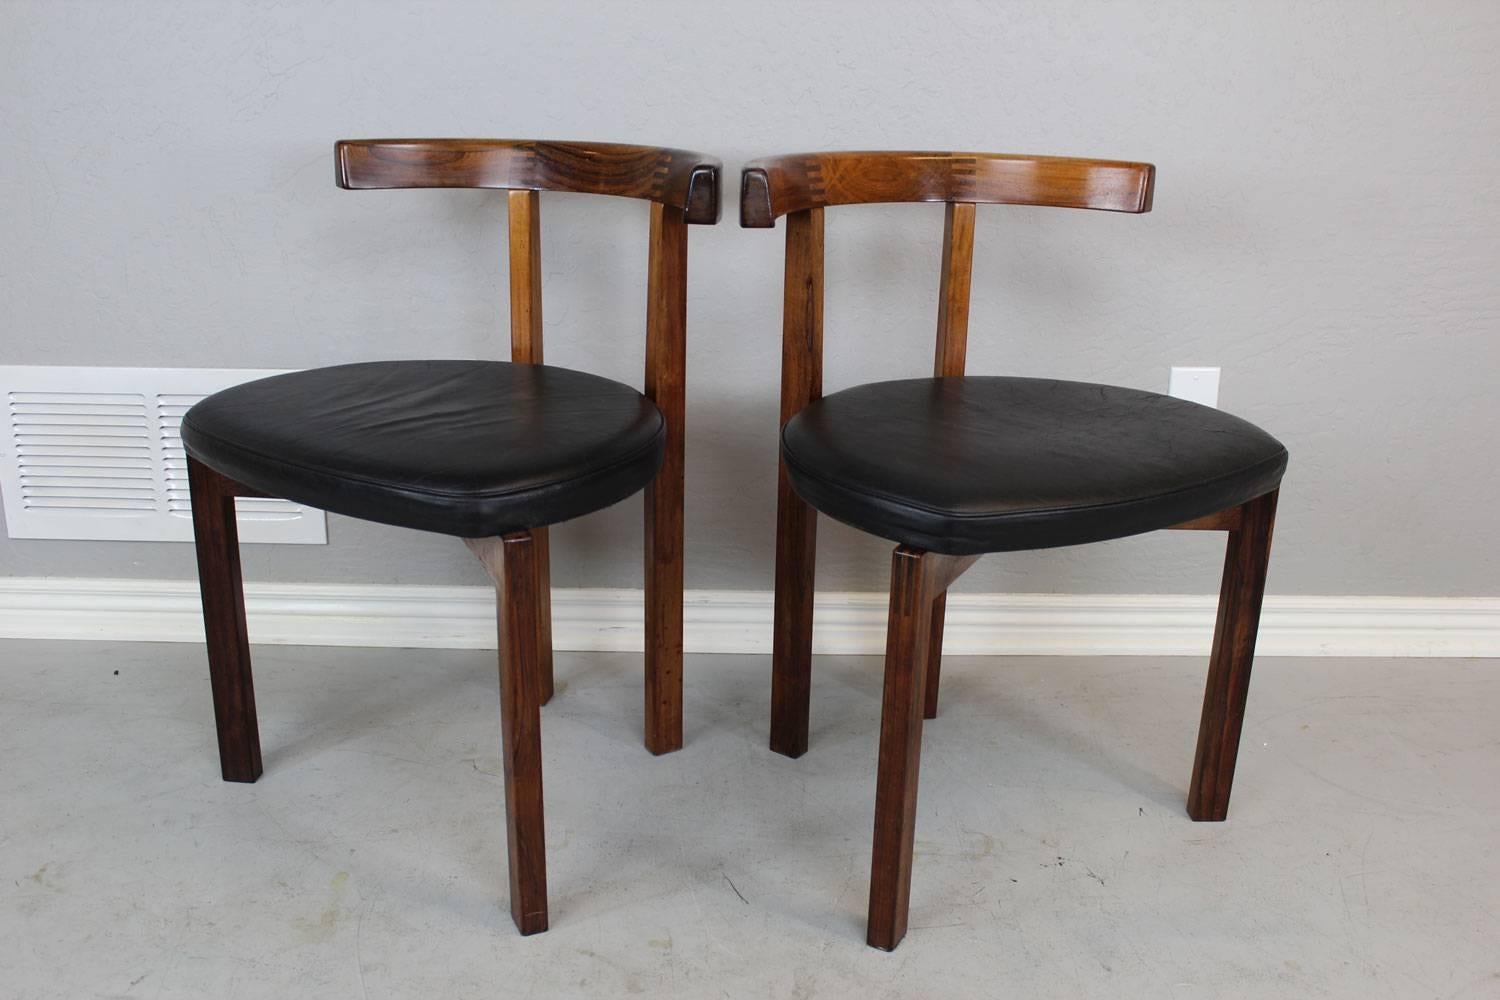 Pair of rare original leather T-chairs by Peter Hvidt for France and Sons. Rosewood with unique and well crafted finger joints throughout.